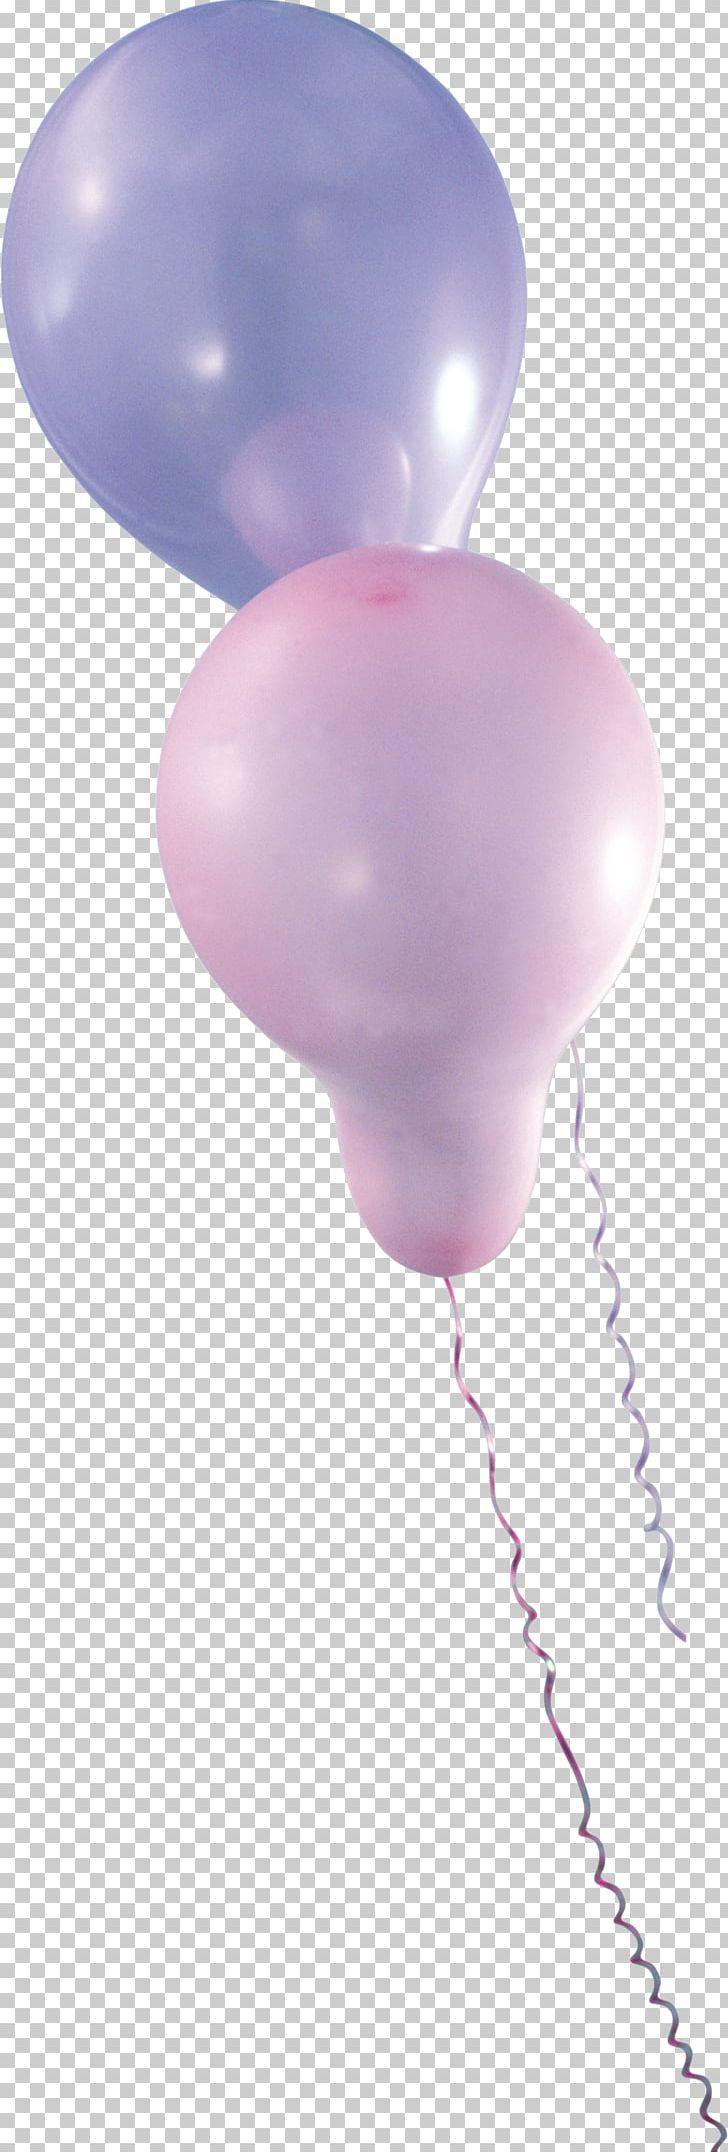 Toy Balloon Flight PNG, Clipart, Balloon, Flight, Kha, Magenta, Objects Free PNG Download